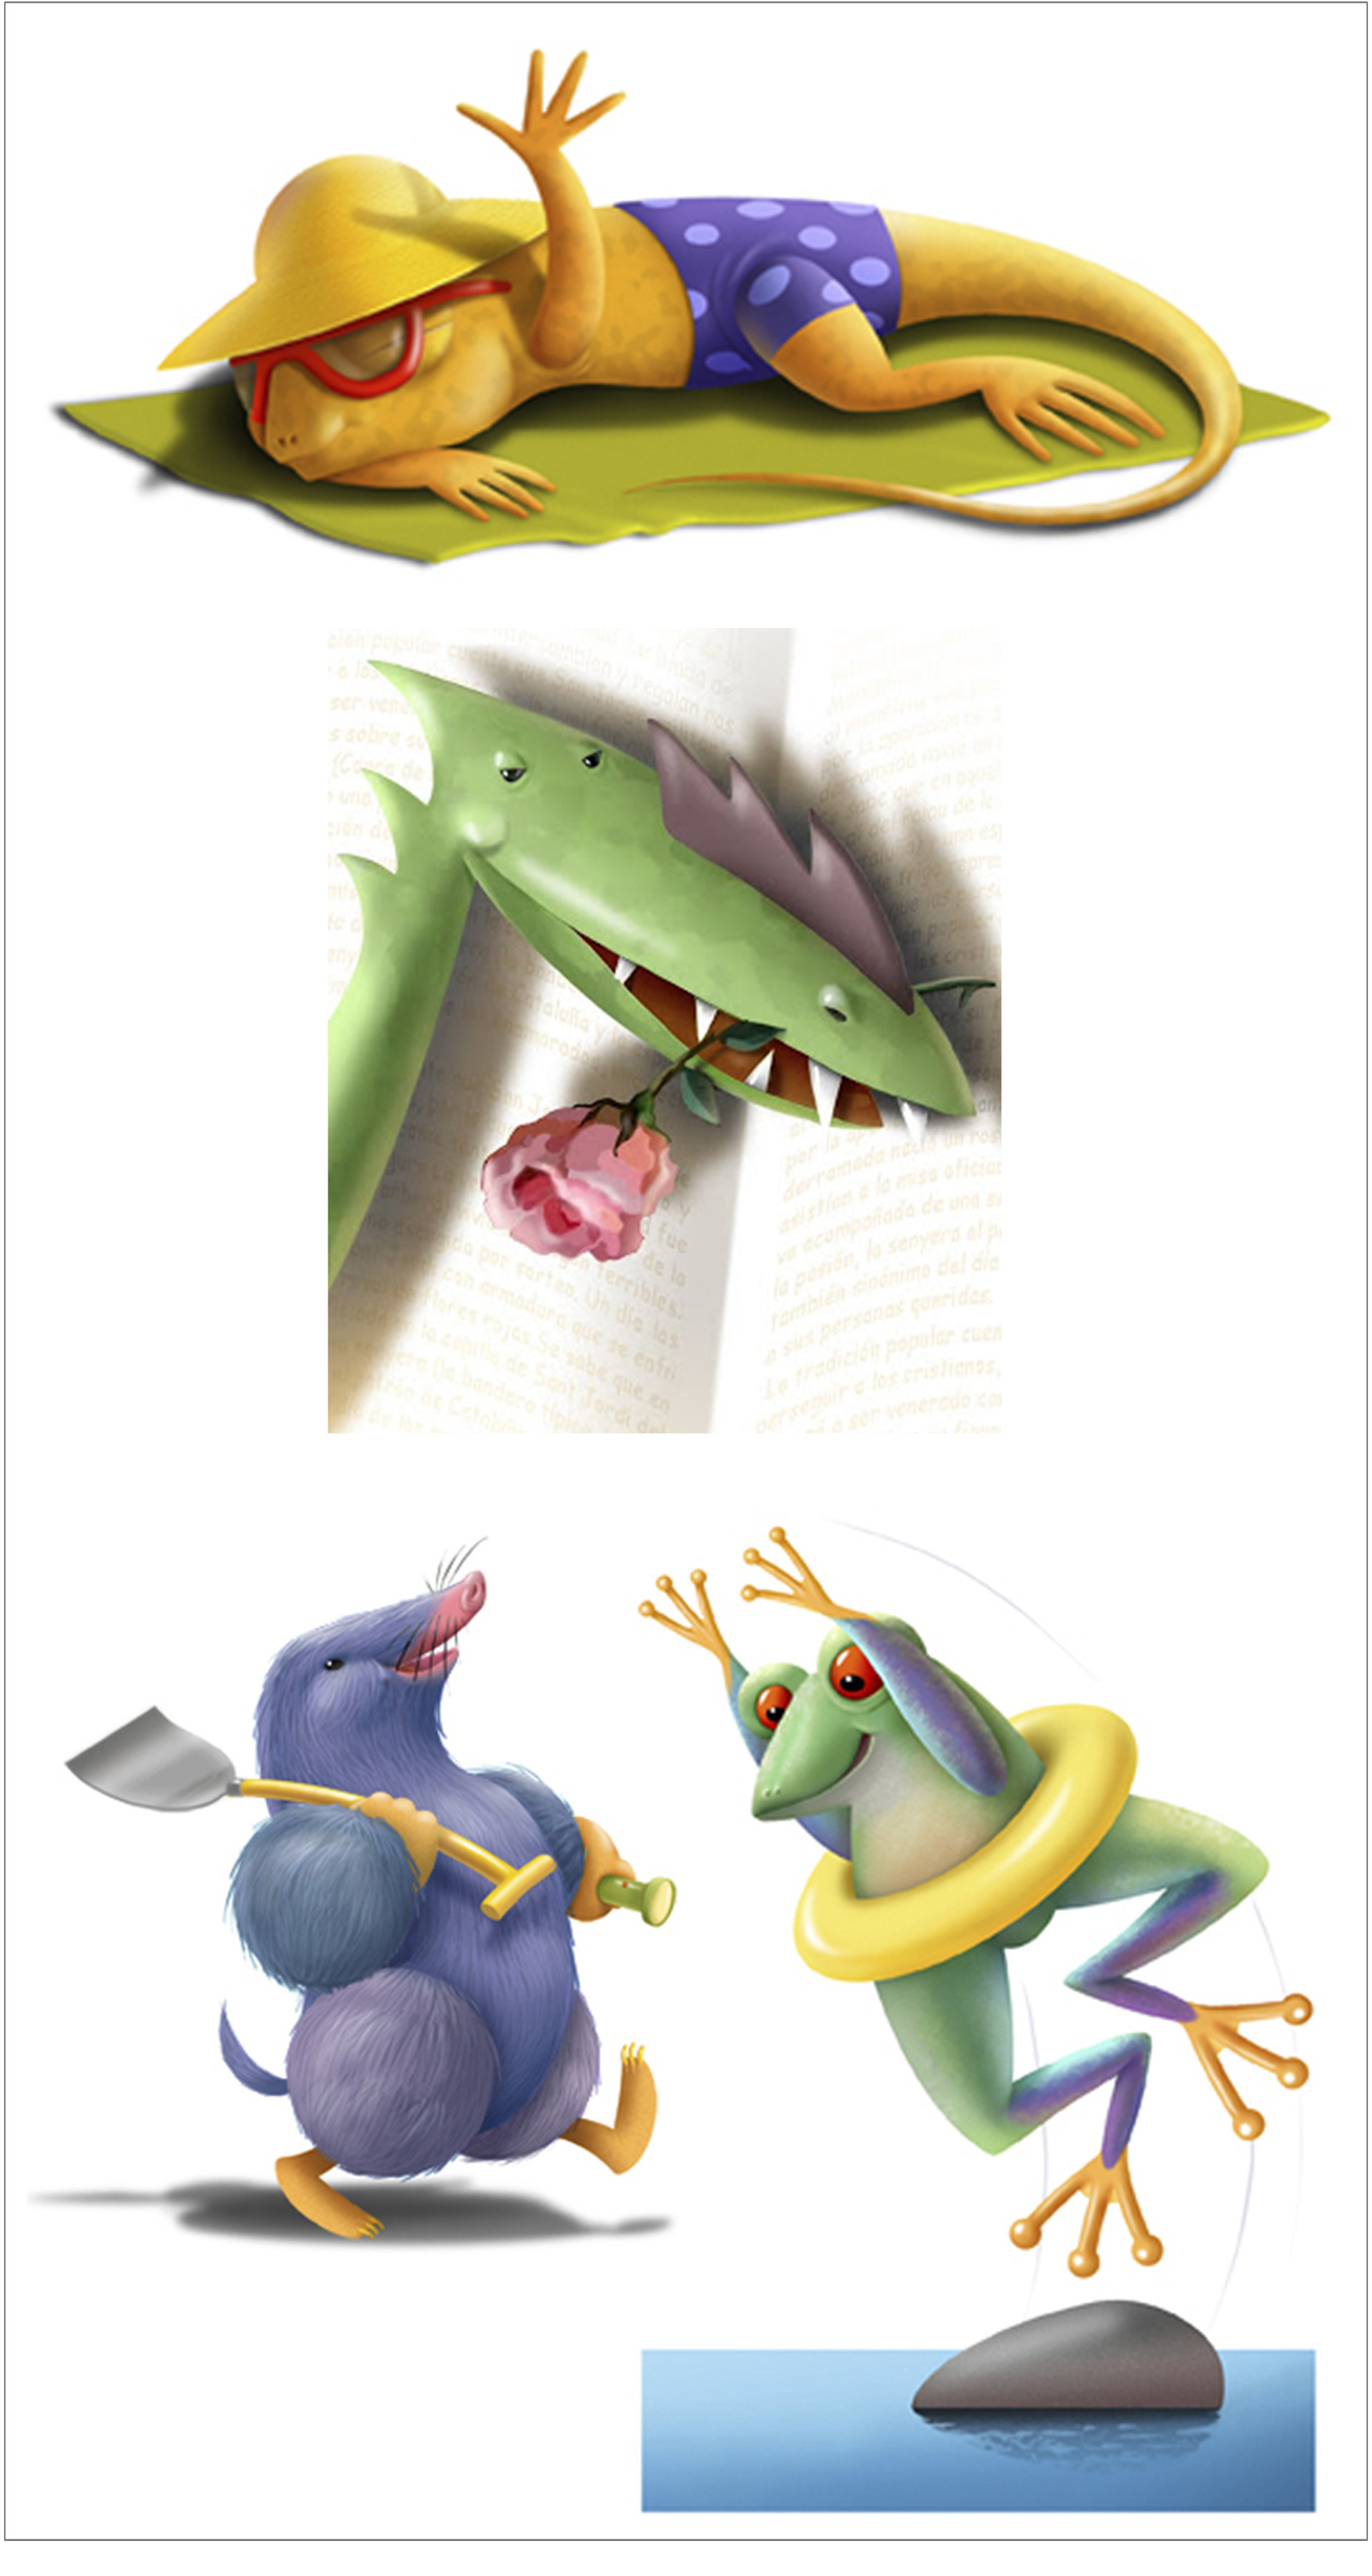 LIZARD, DRAGON, MOLE AND FROG. Personal project.